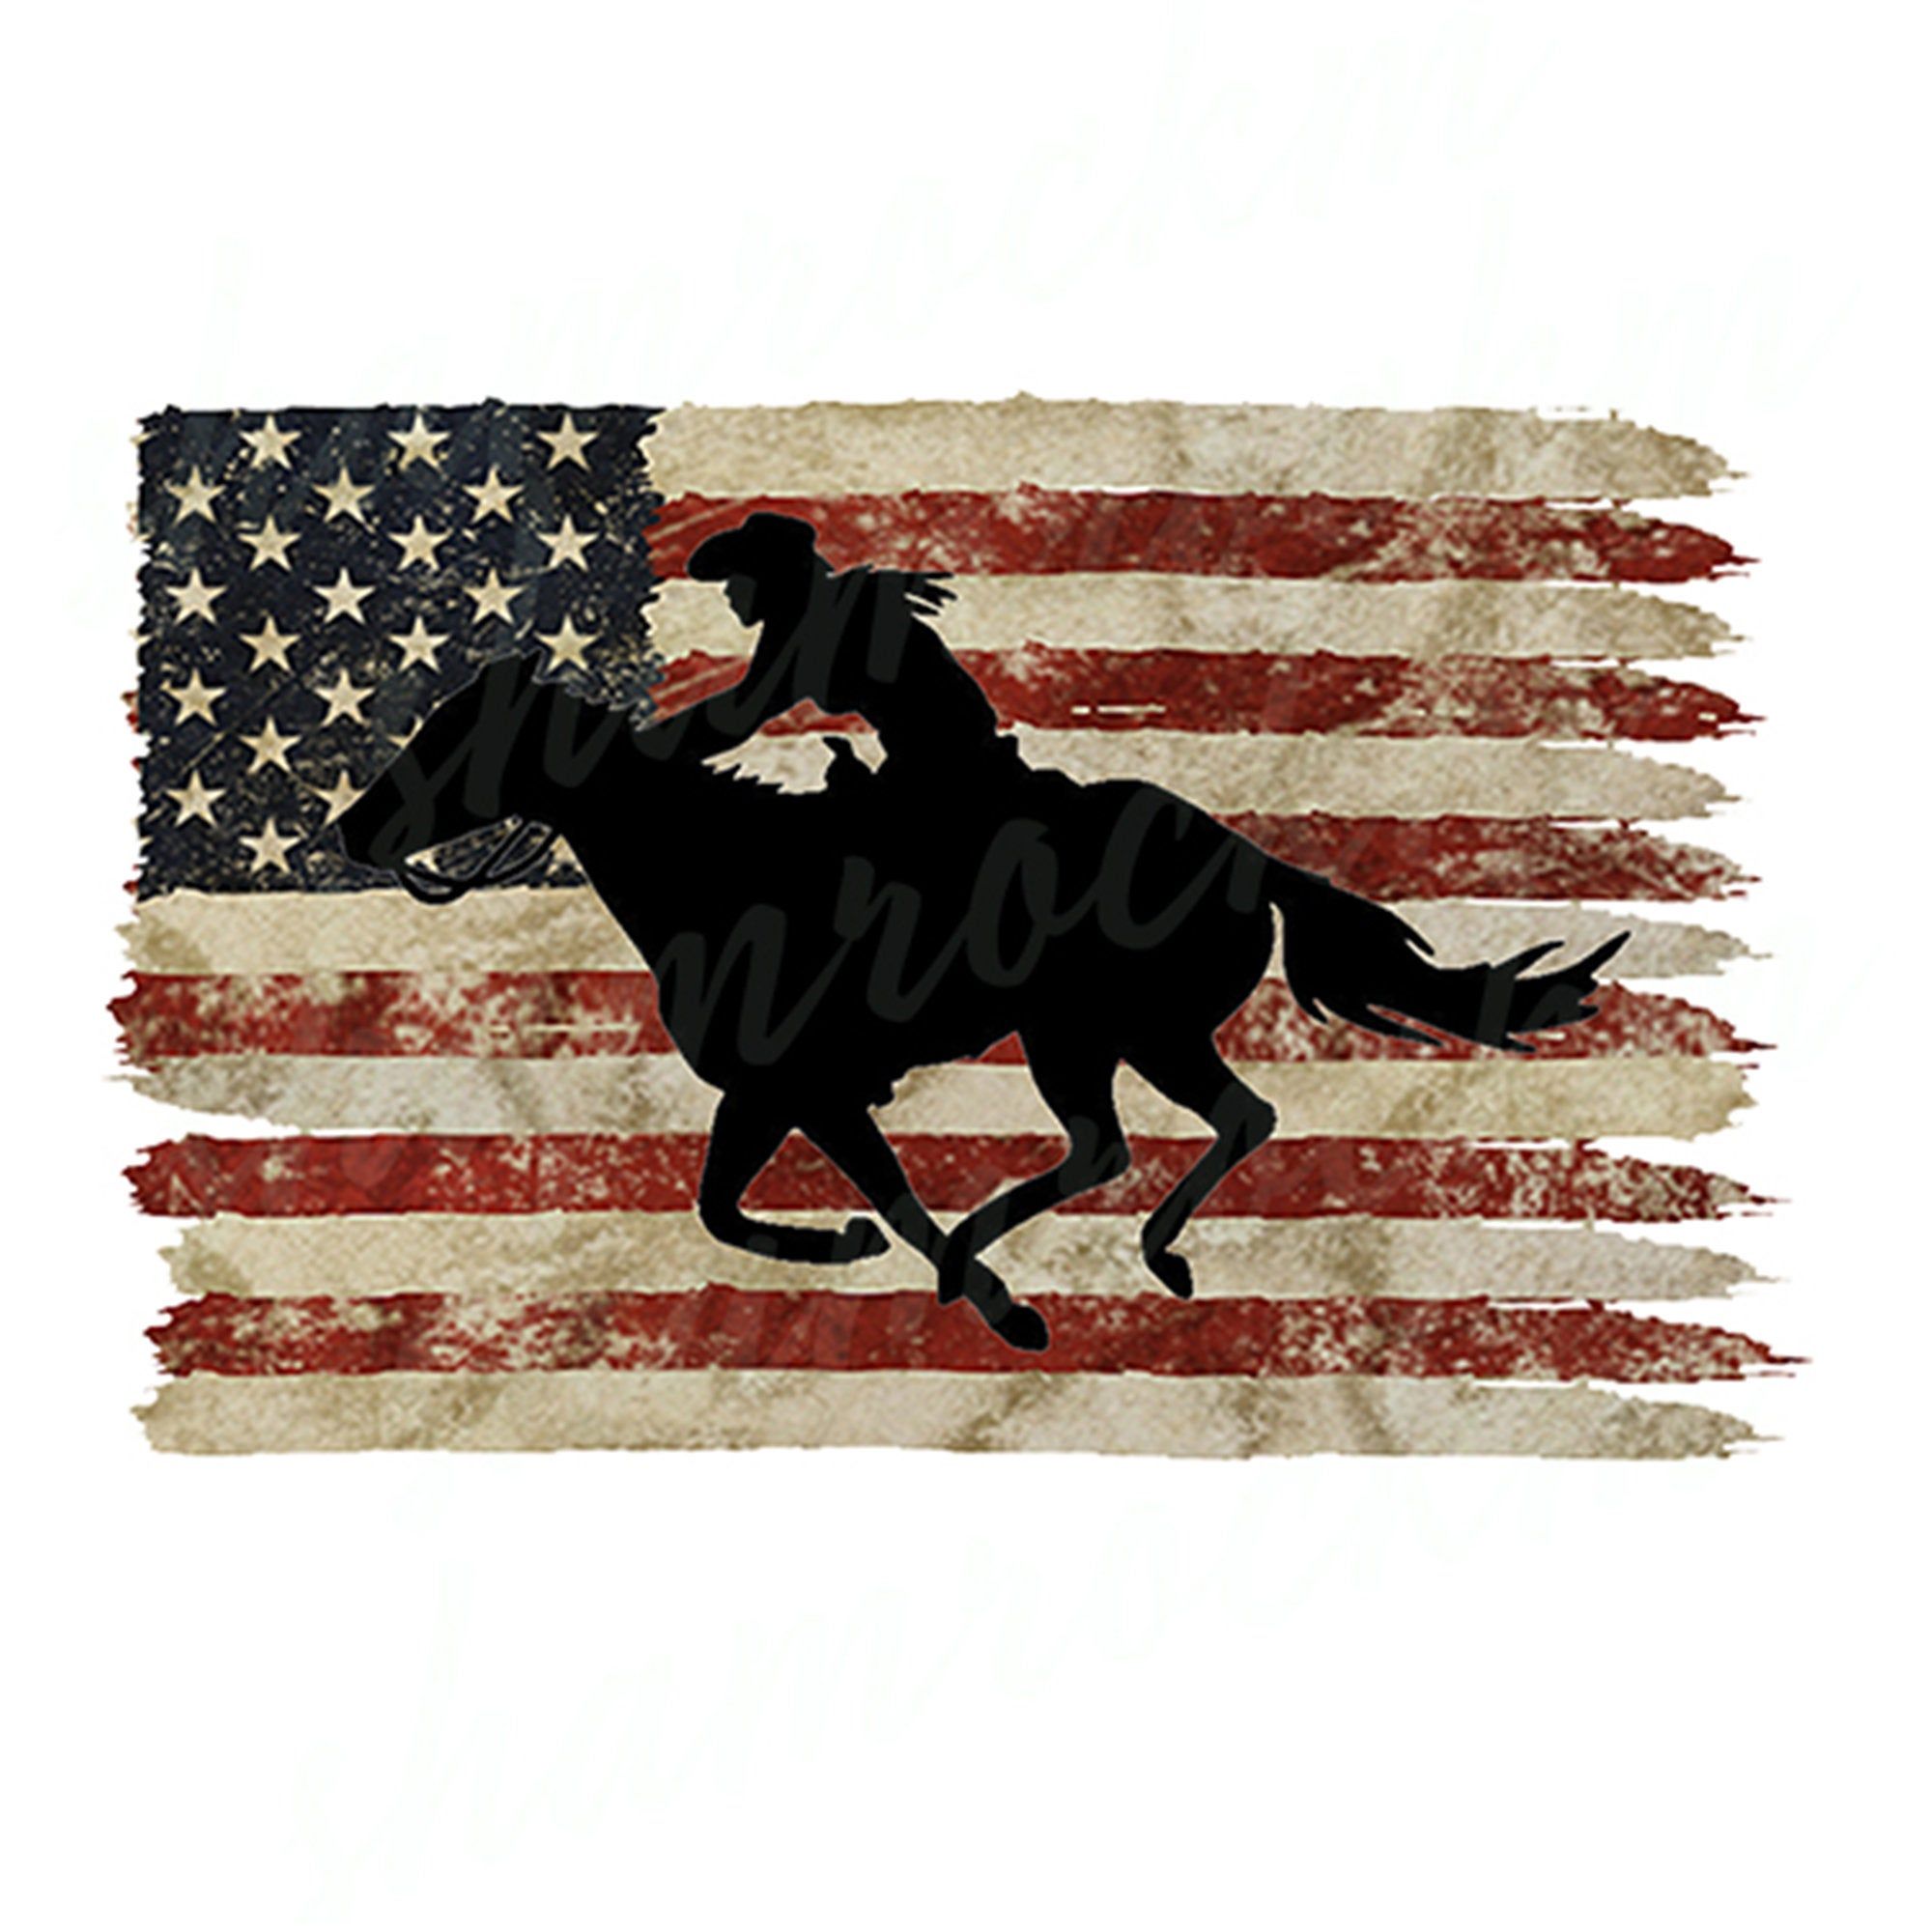 Cowgirl and the American Flag Png Image With Transparent. American flag wallpaper, Horse painting, iPhone background inspiration